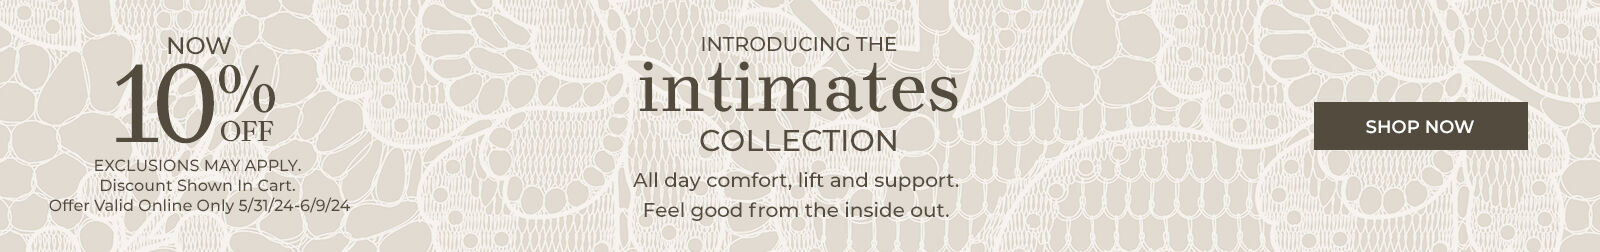 Introducing the Intimates Collection. All day comfort and support. Feel good from the inside out.  now 10% off exclusions may apply. discount shown in cart. offer valid online only 5/31/24 - 6/9/24 Shop Now 